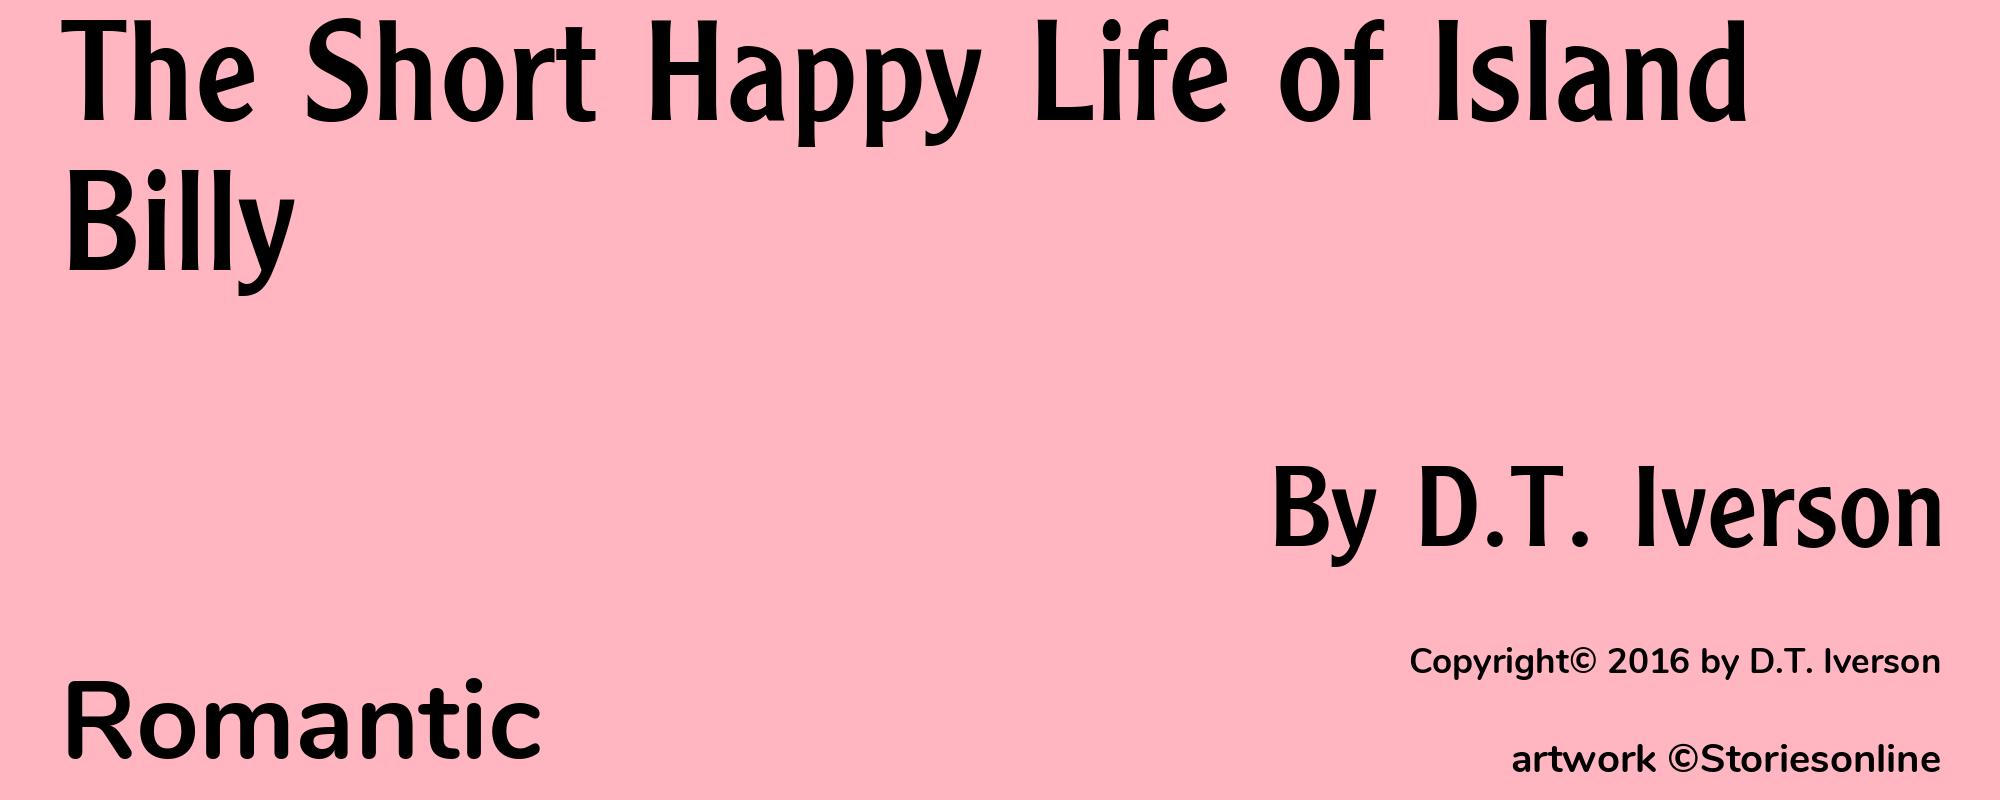 The Short Happy Life of Island Billy - Cover